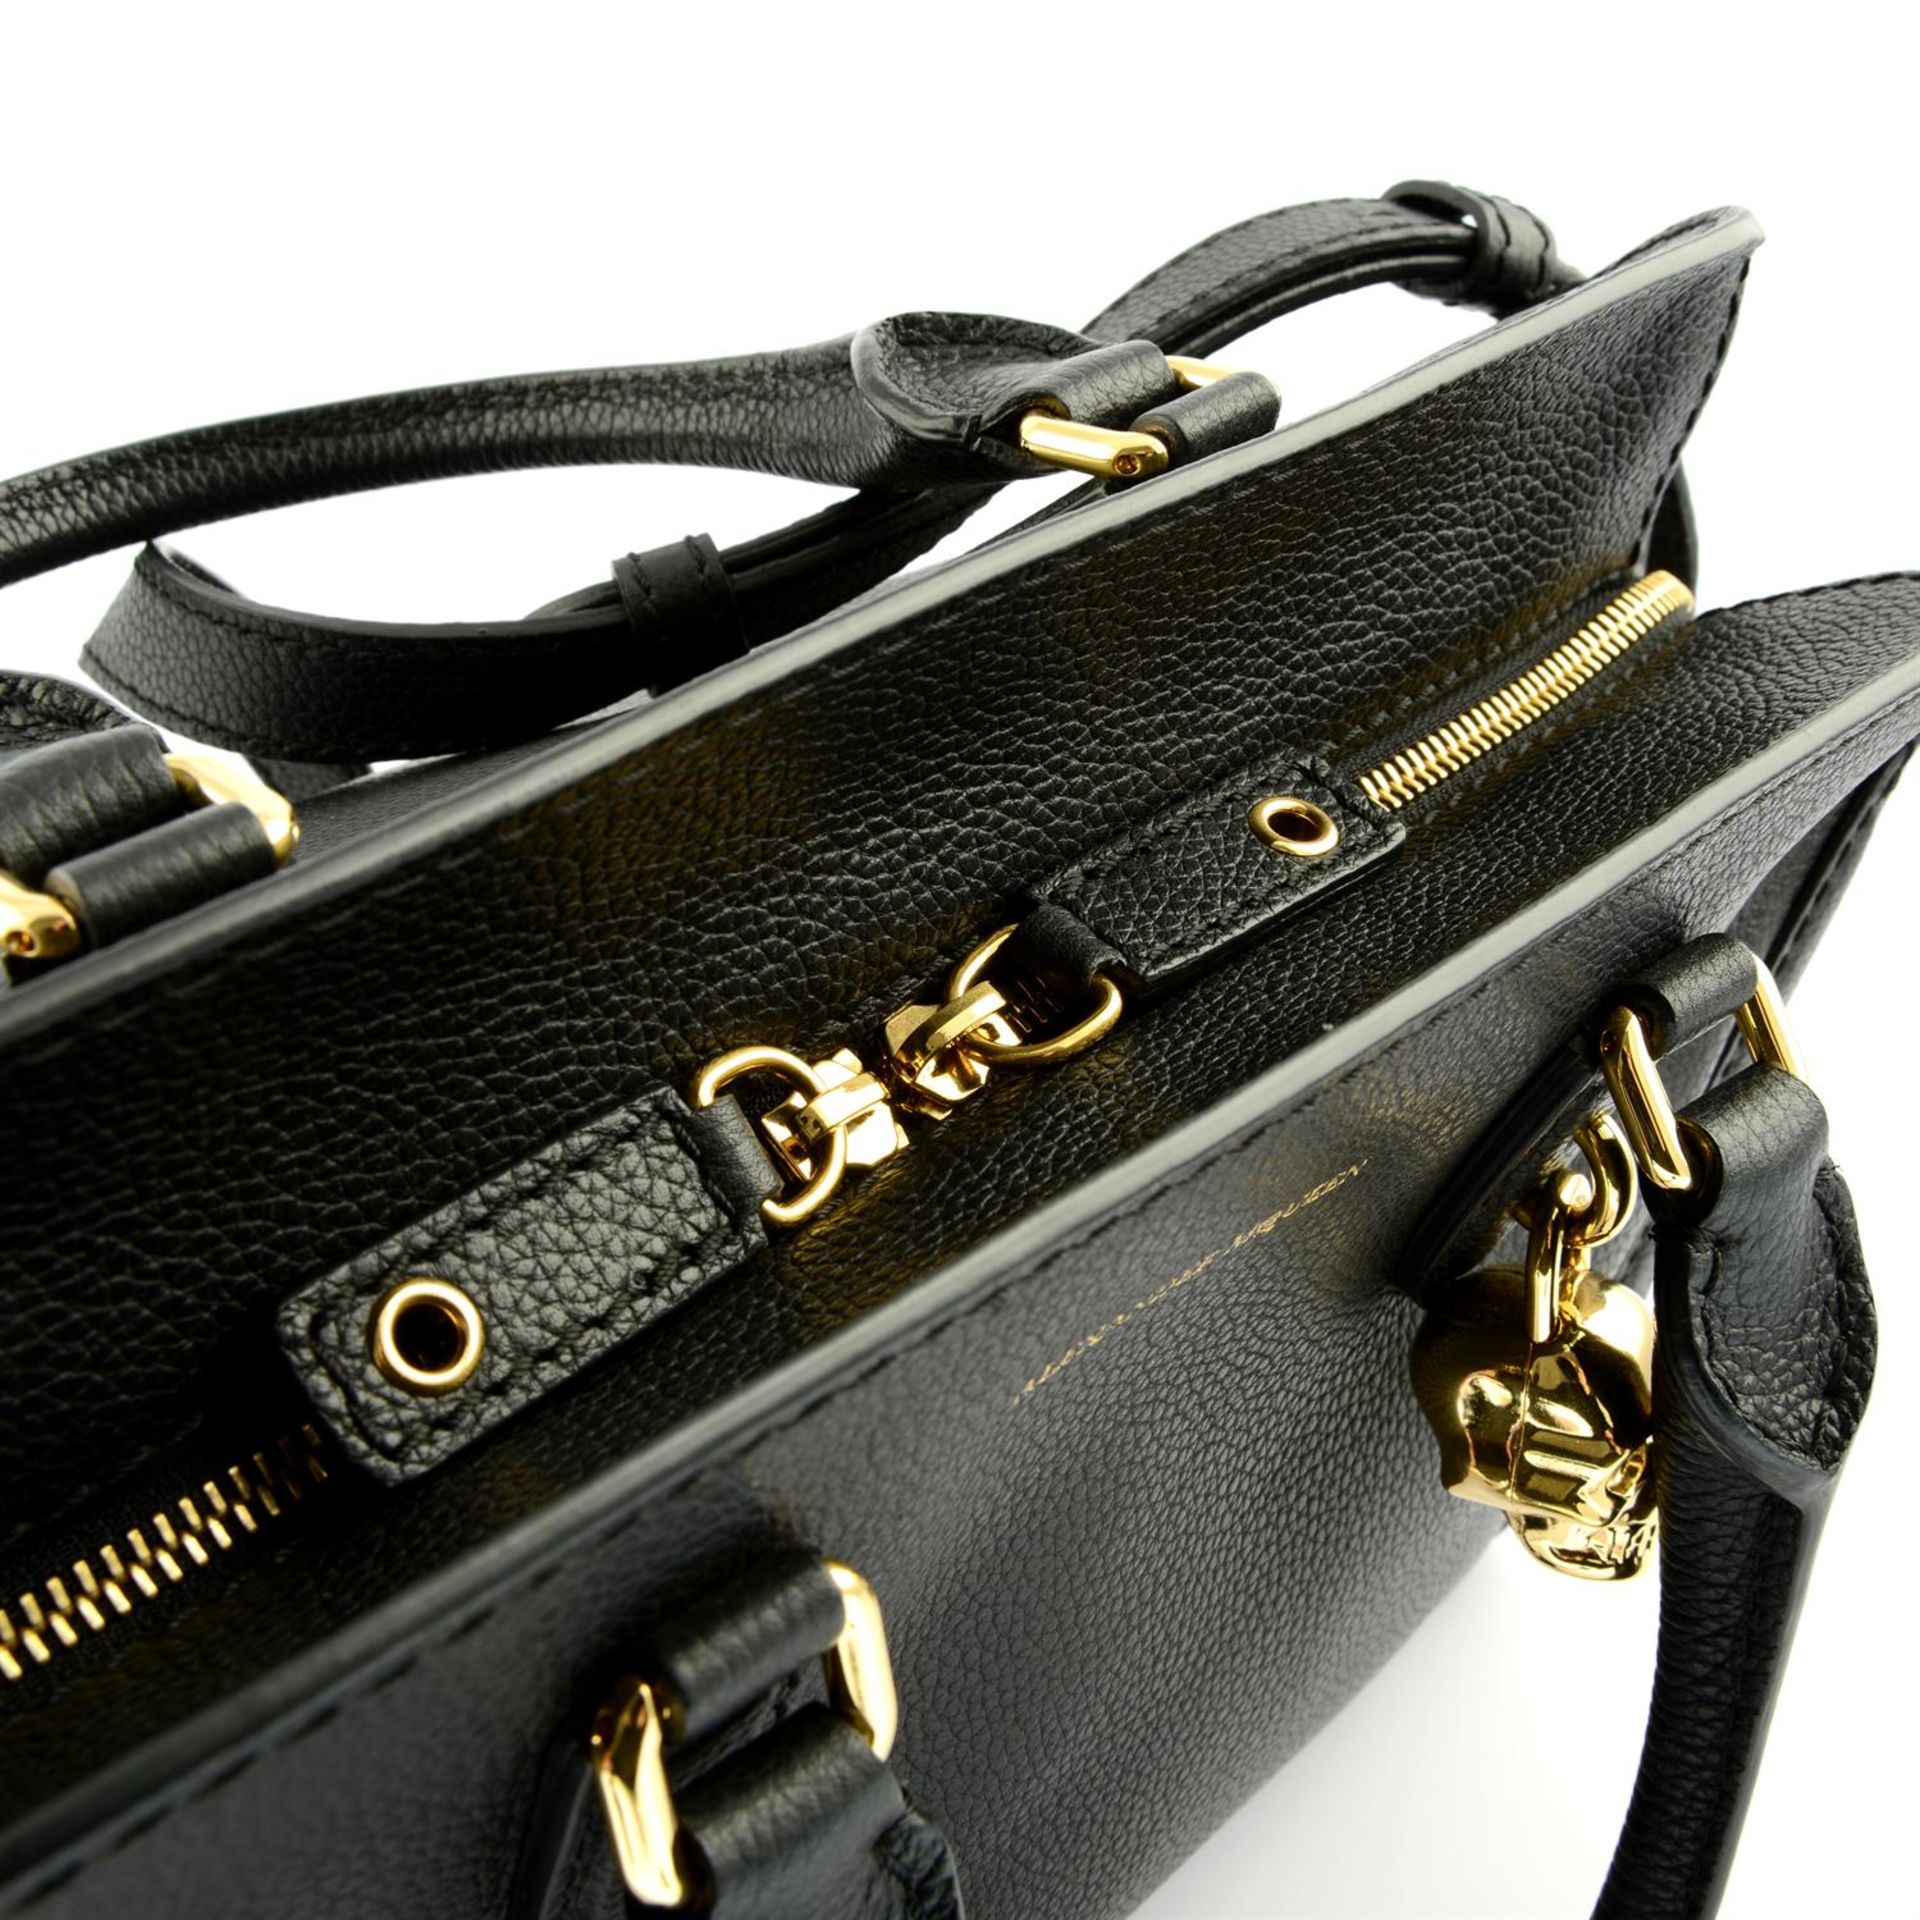 ALEXANDER MCQUEEN - a black leather Skull Padlock tote. - Image 5 of 5